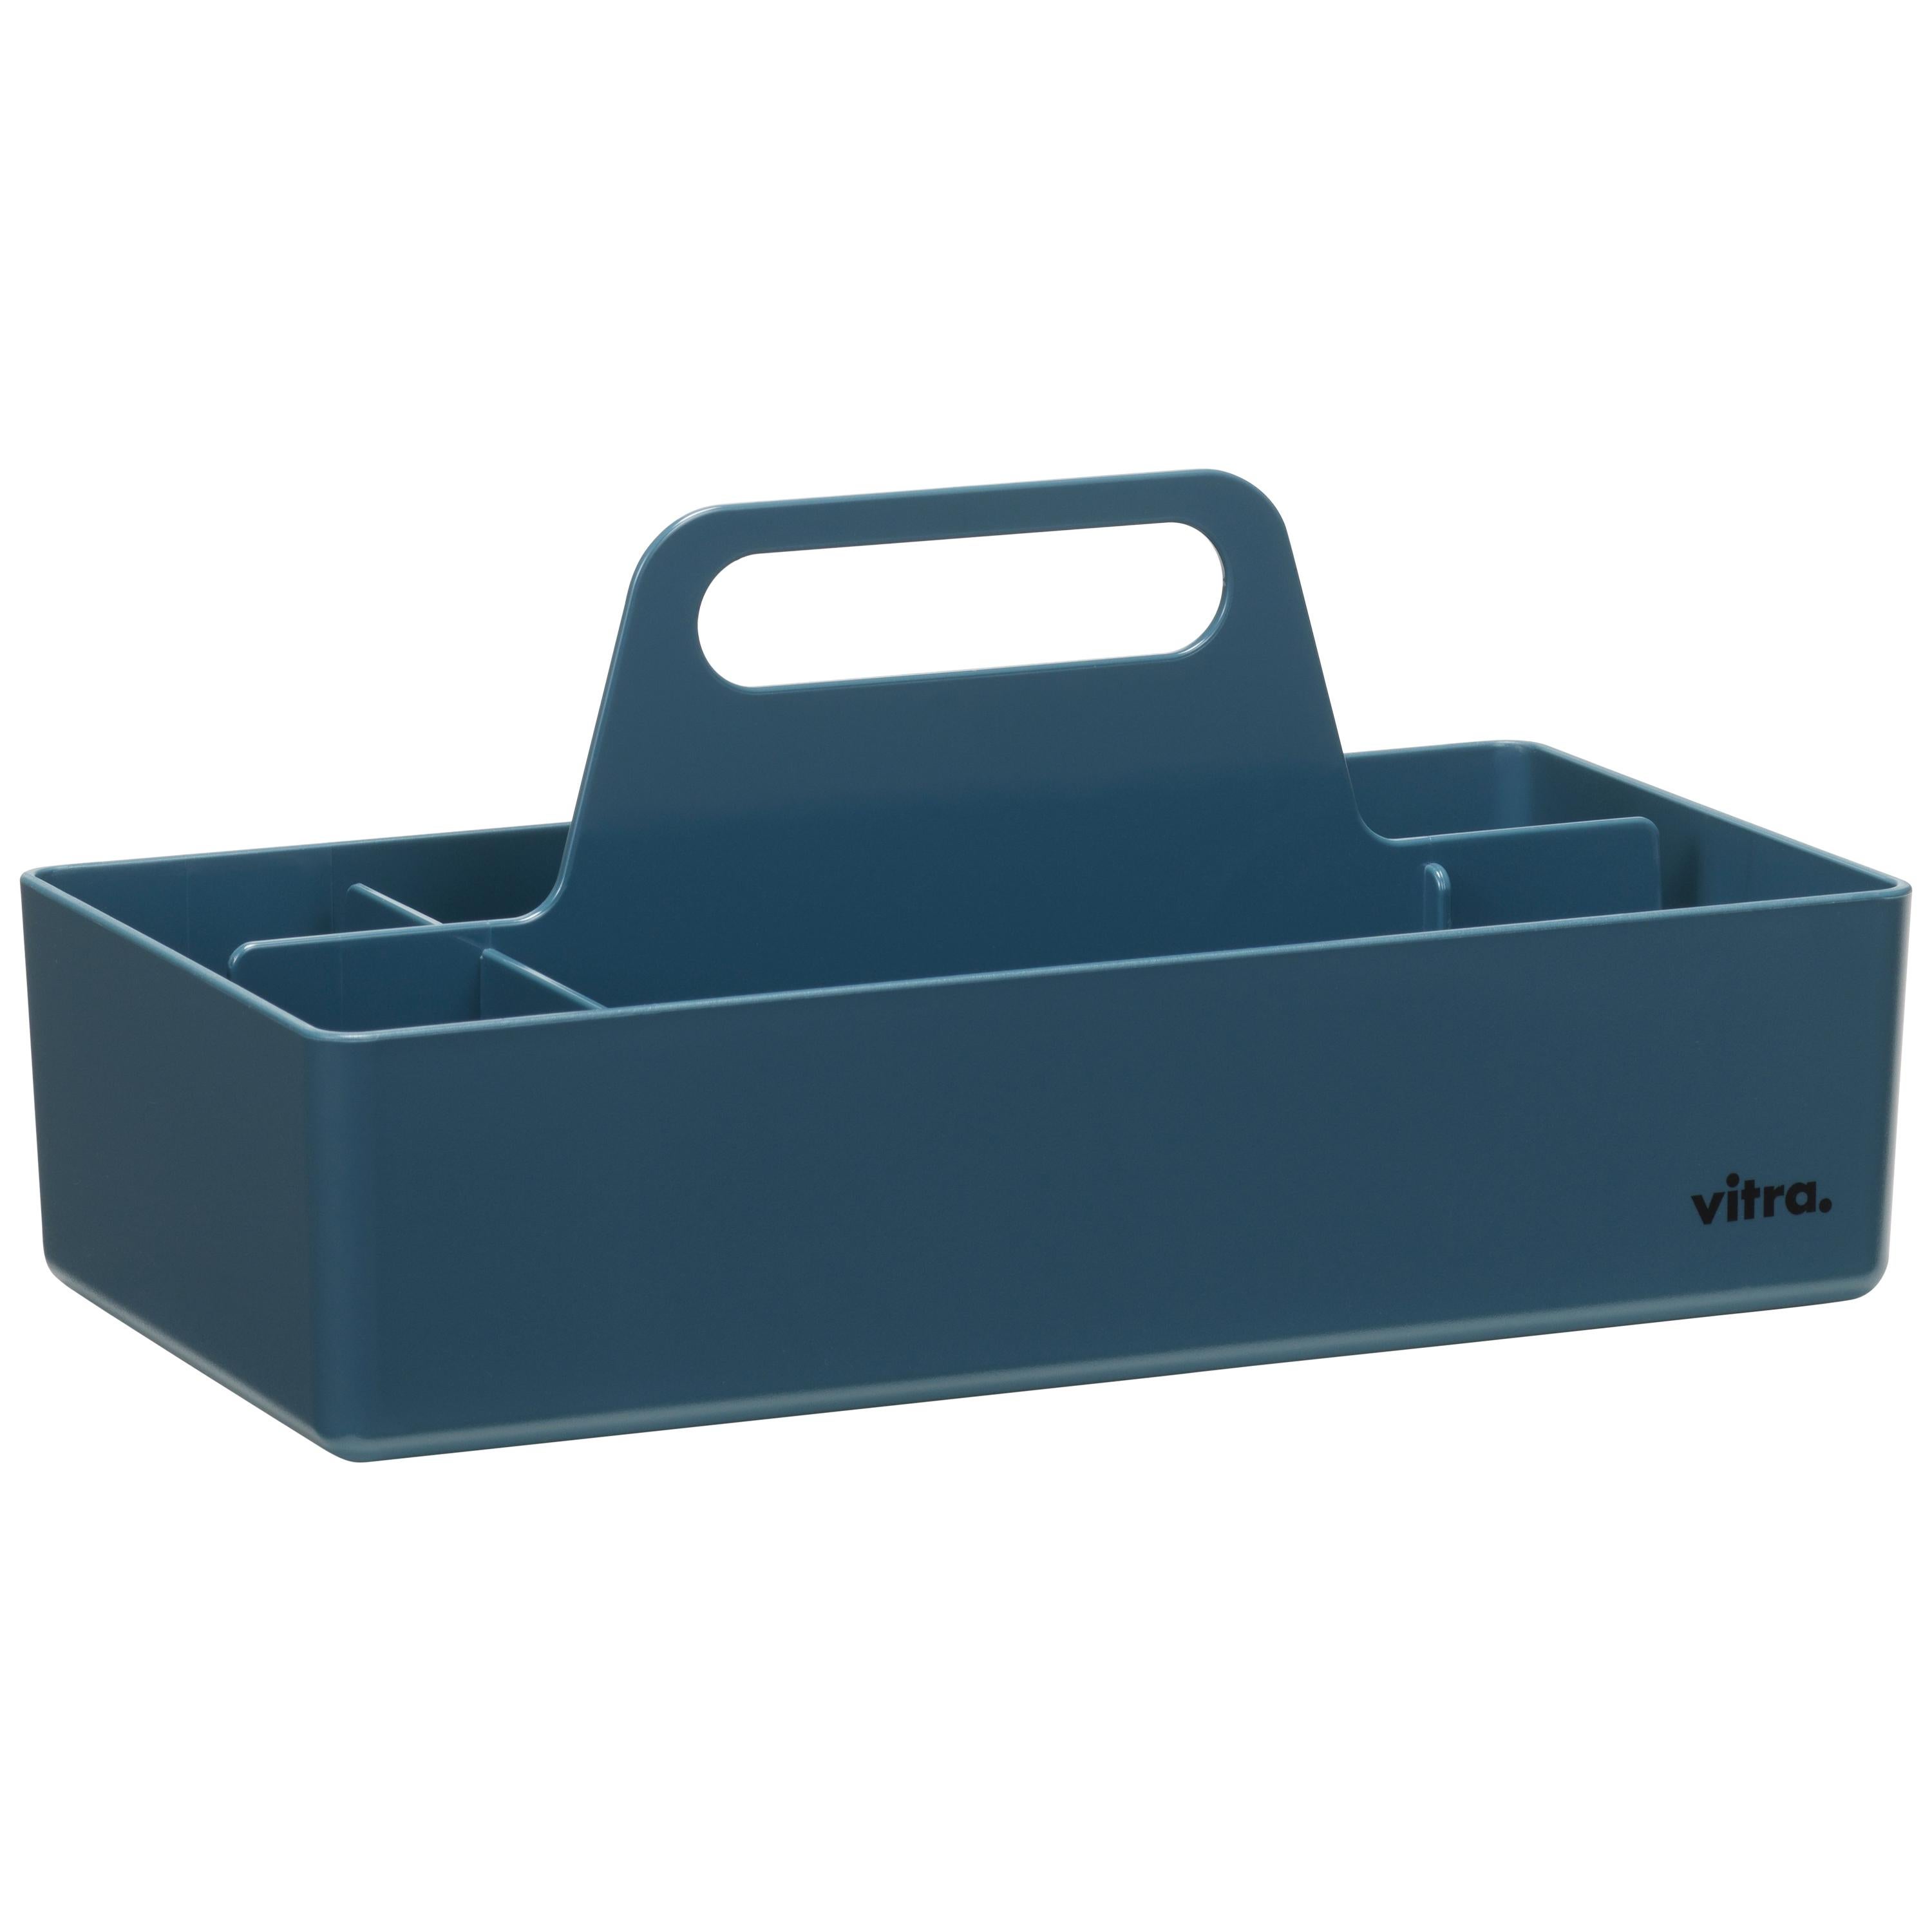 Vitra Toolbox in Sea Blue by Arik Levy For Sale